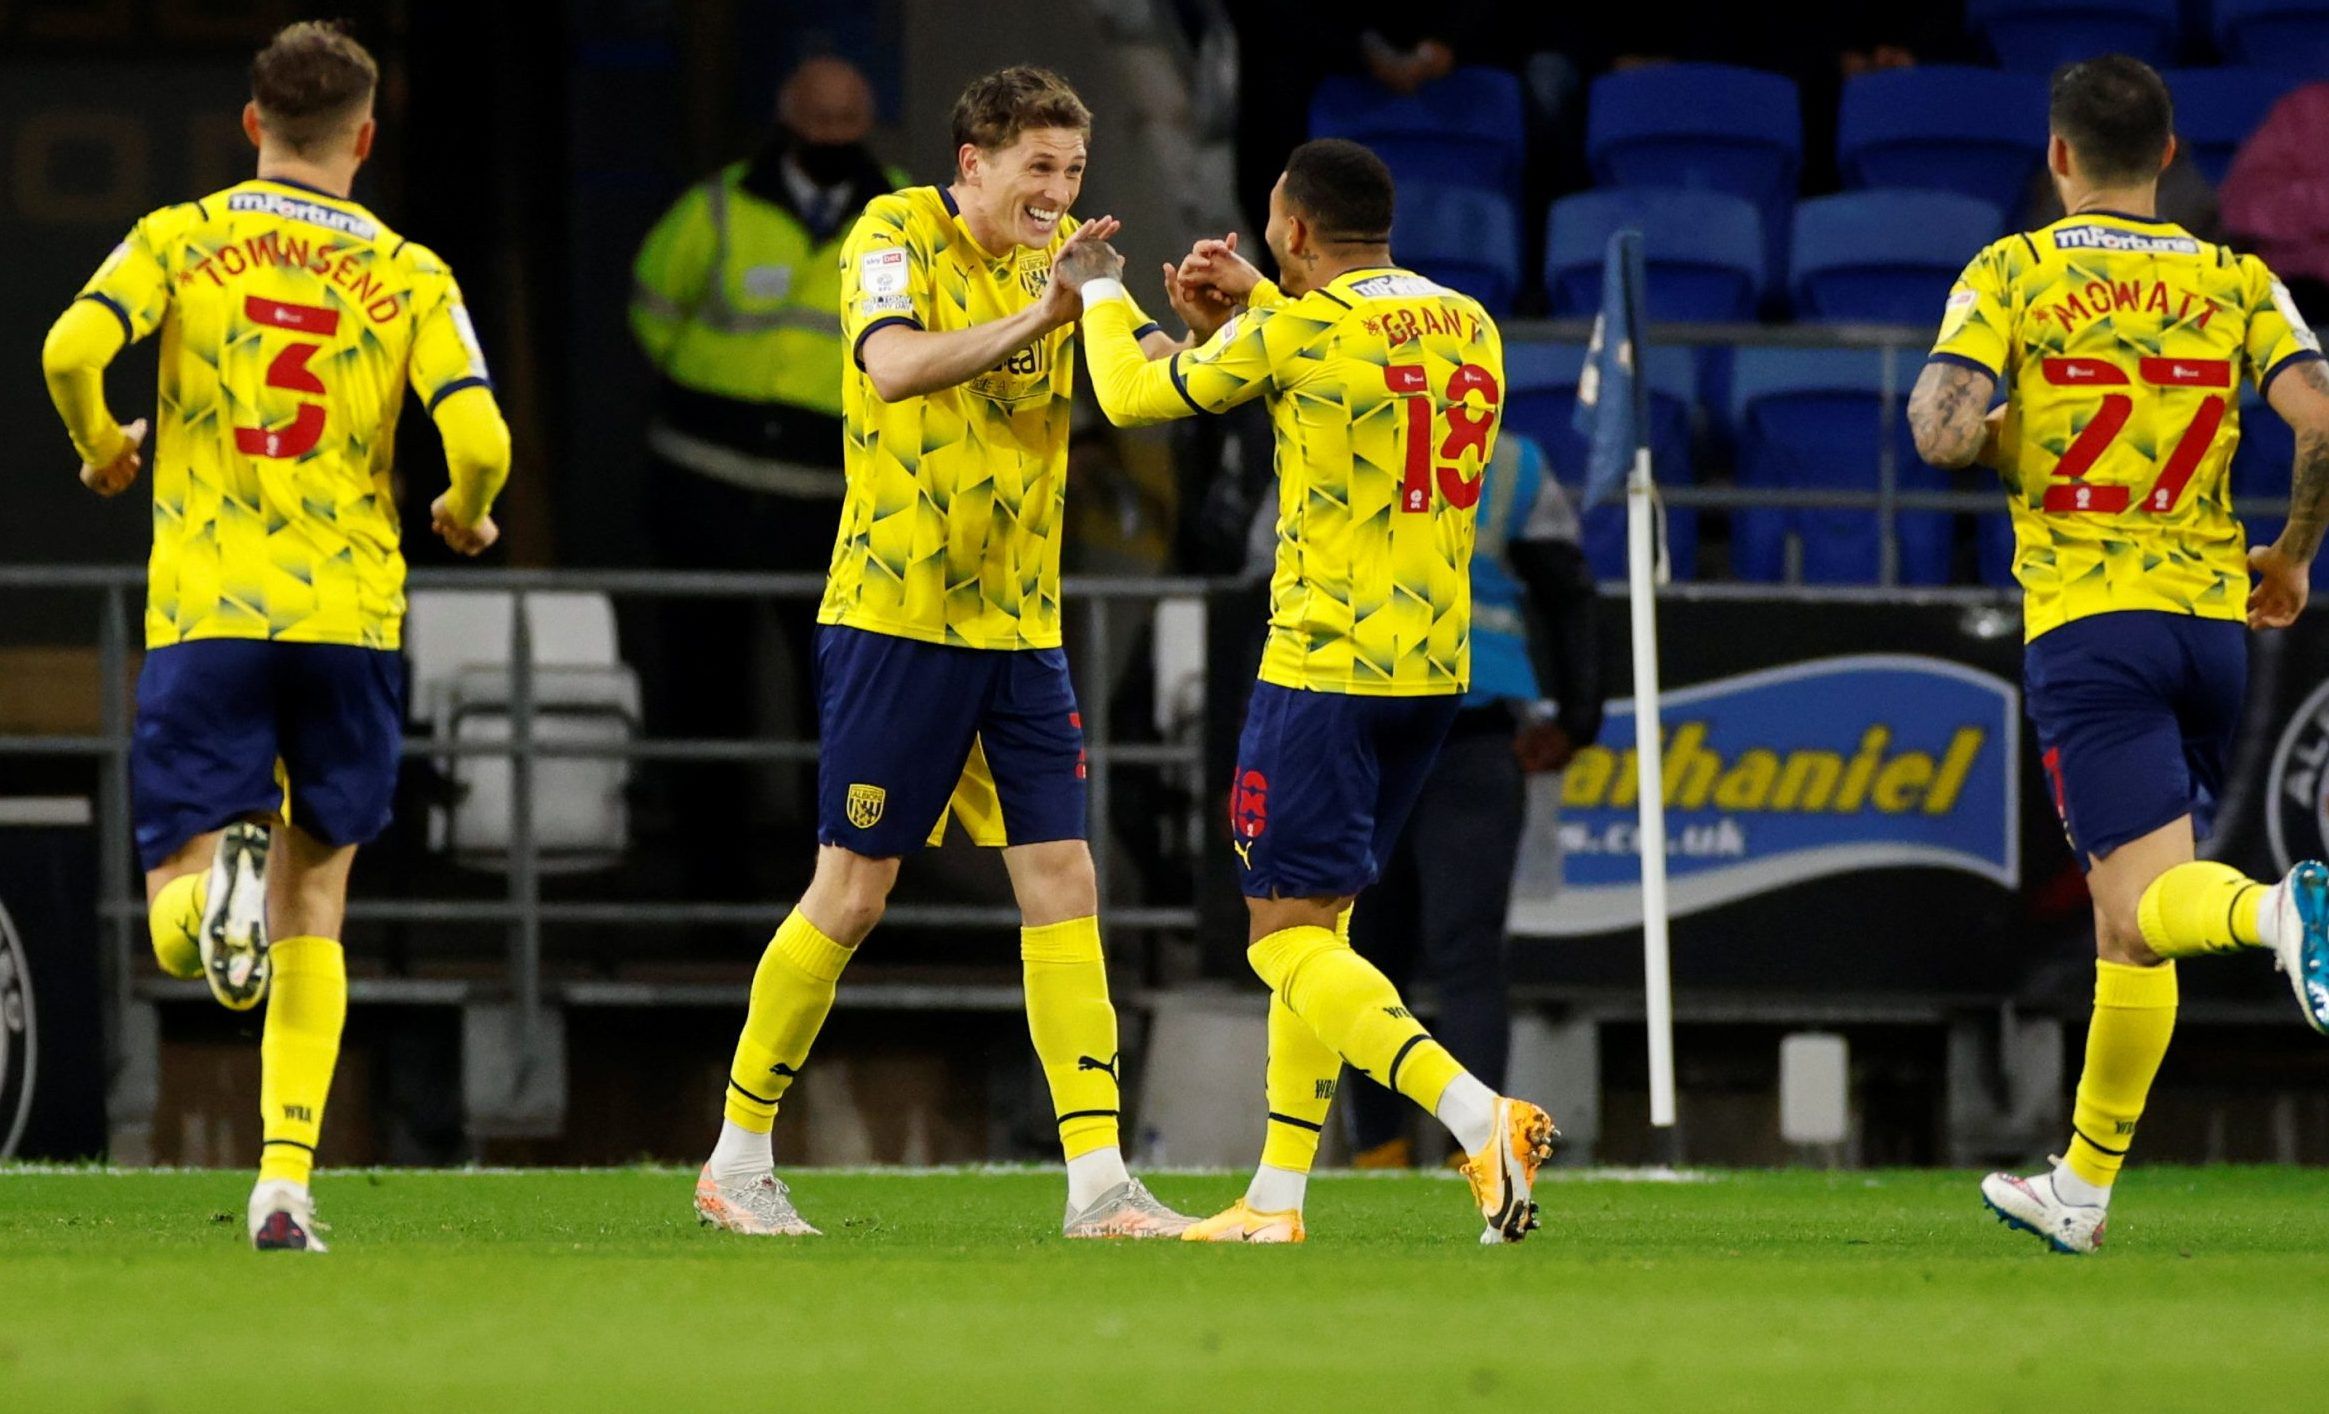 West Bromwich Albion's Karlan Grant celebrates after scoring their first goal with Adam Reach